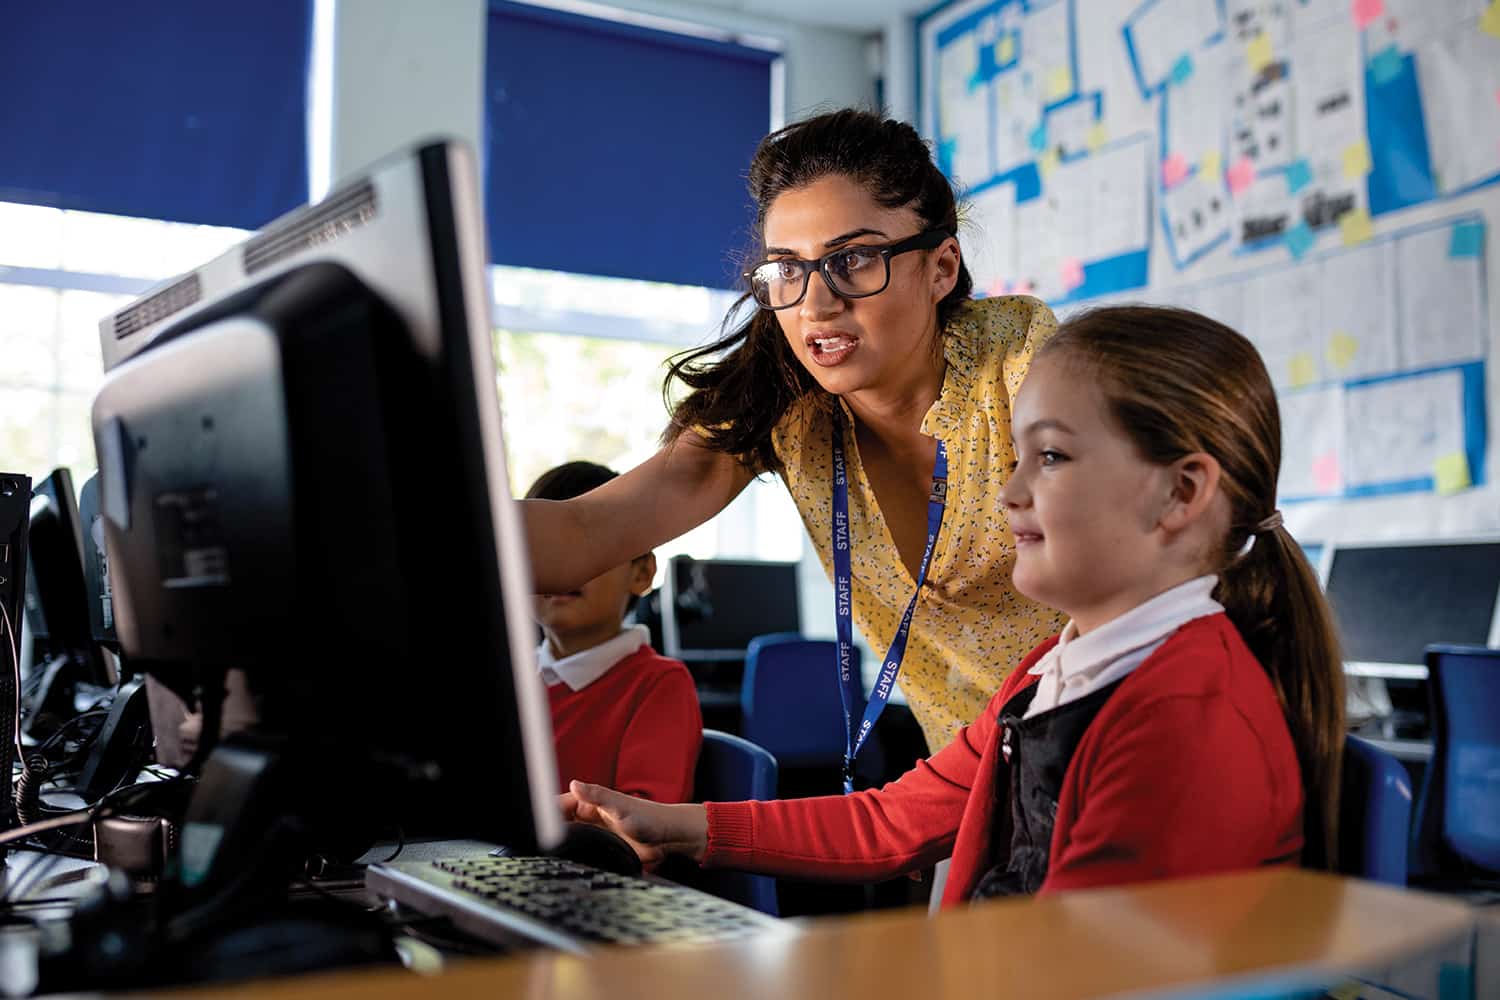 A teacher showing a young pupil something on a computer monitor